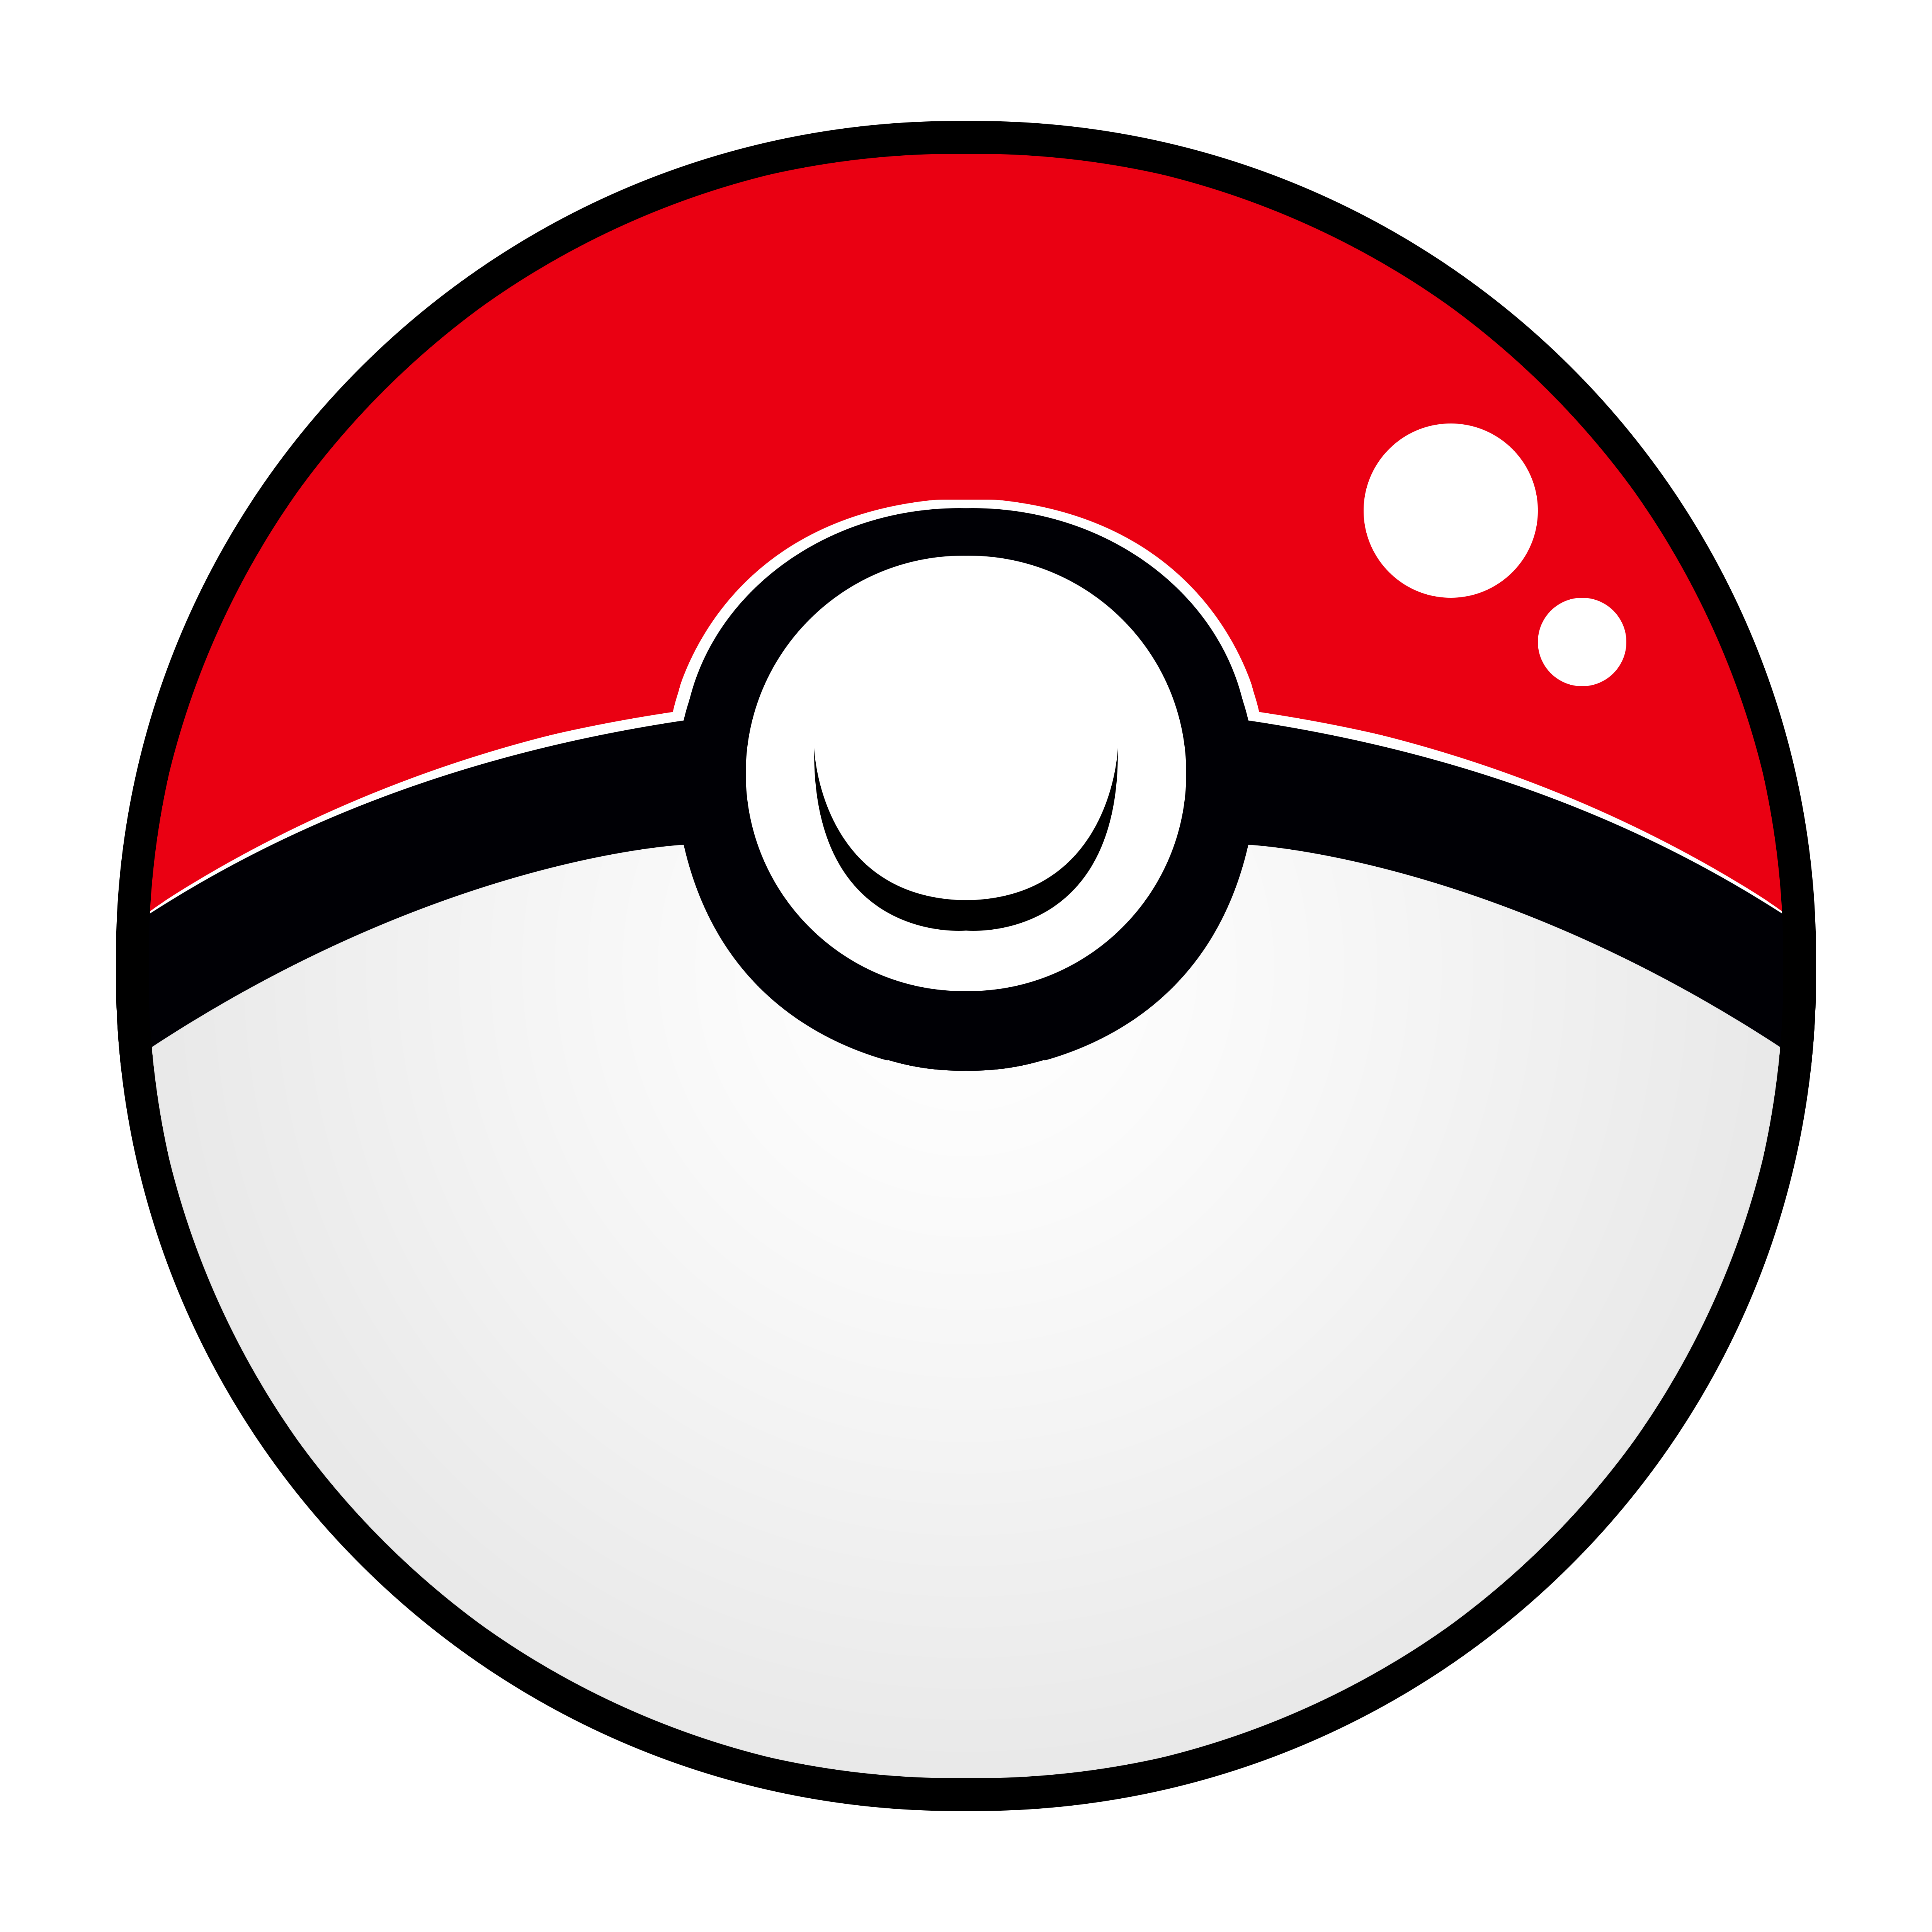 Pokeball PNG, Pokeball Transparent Background FreeIconsPNG